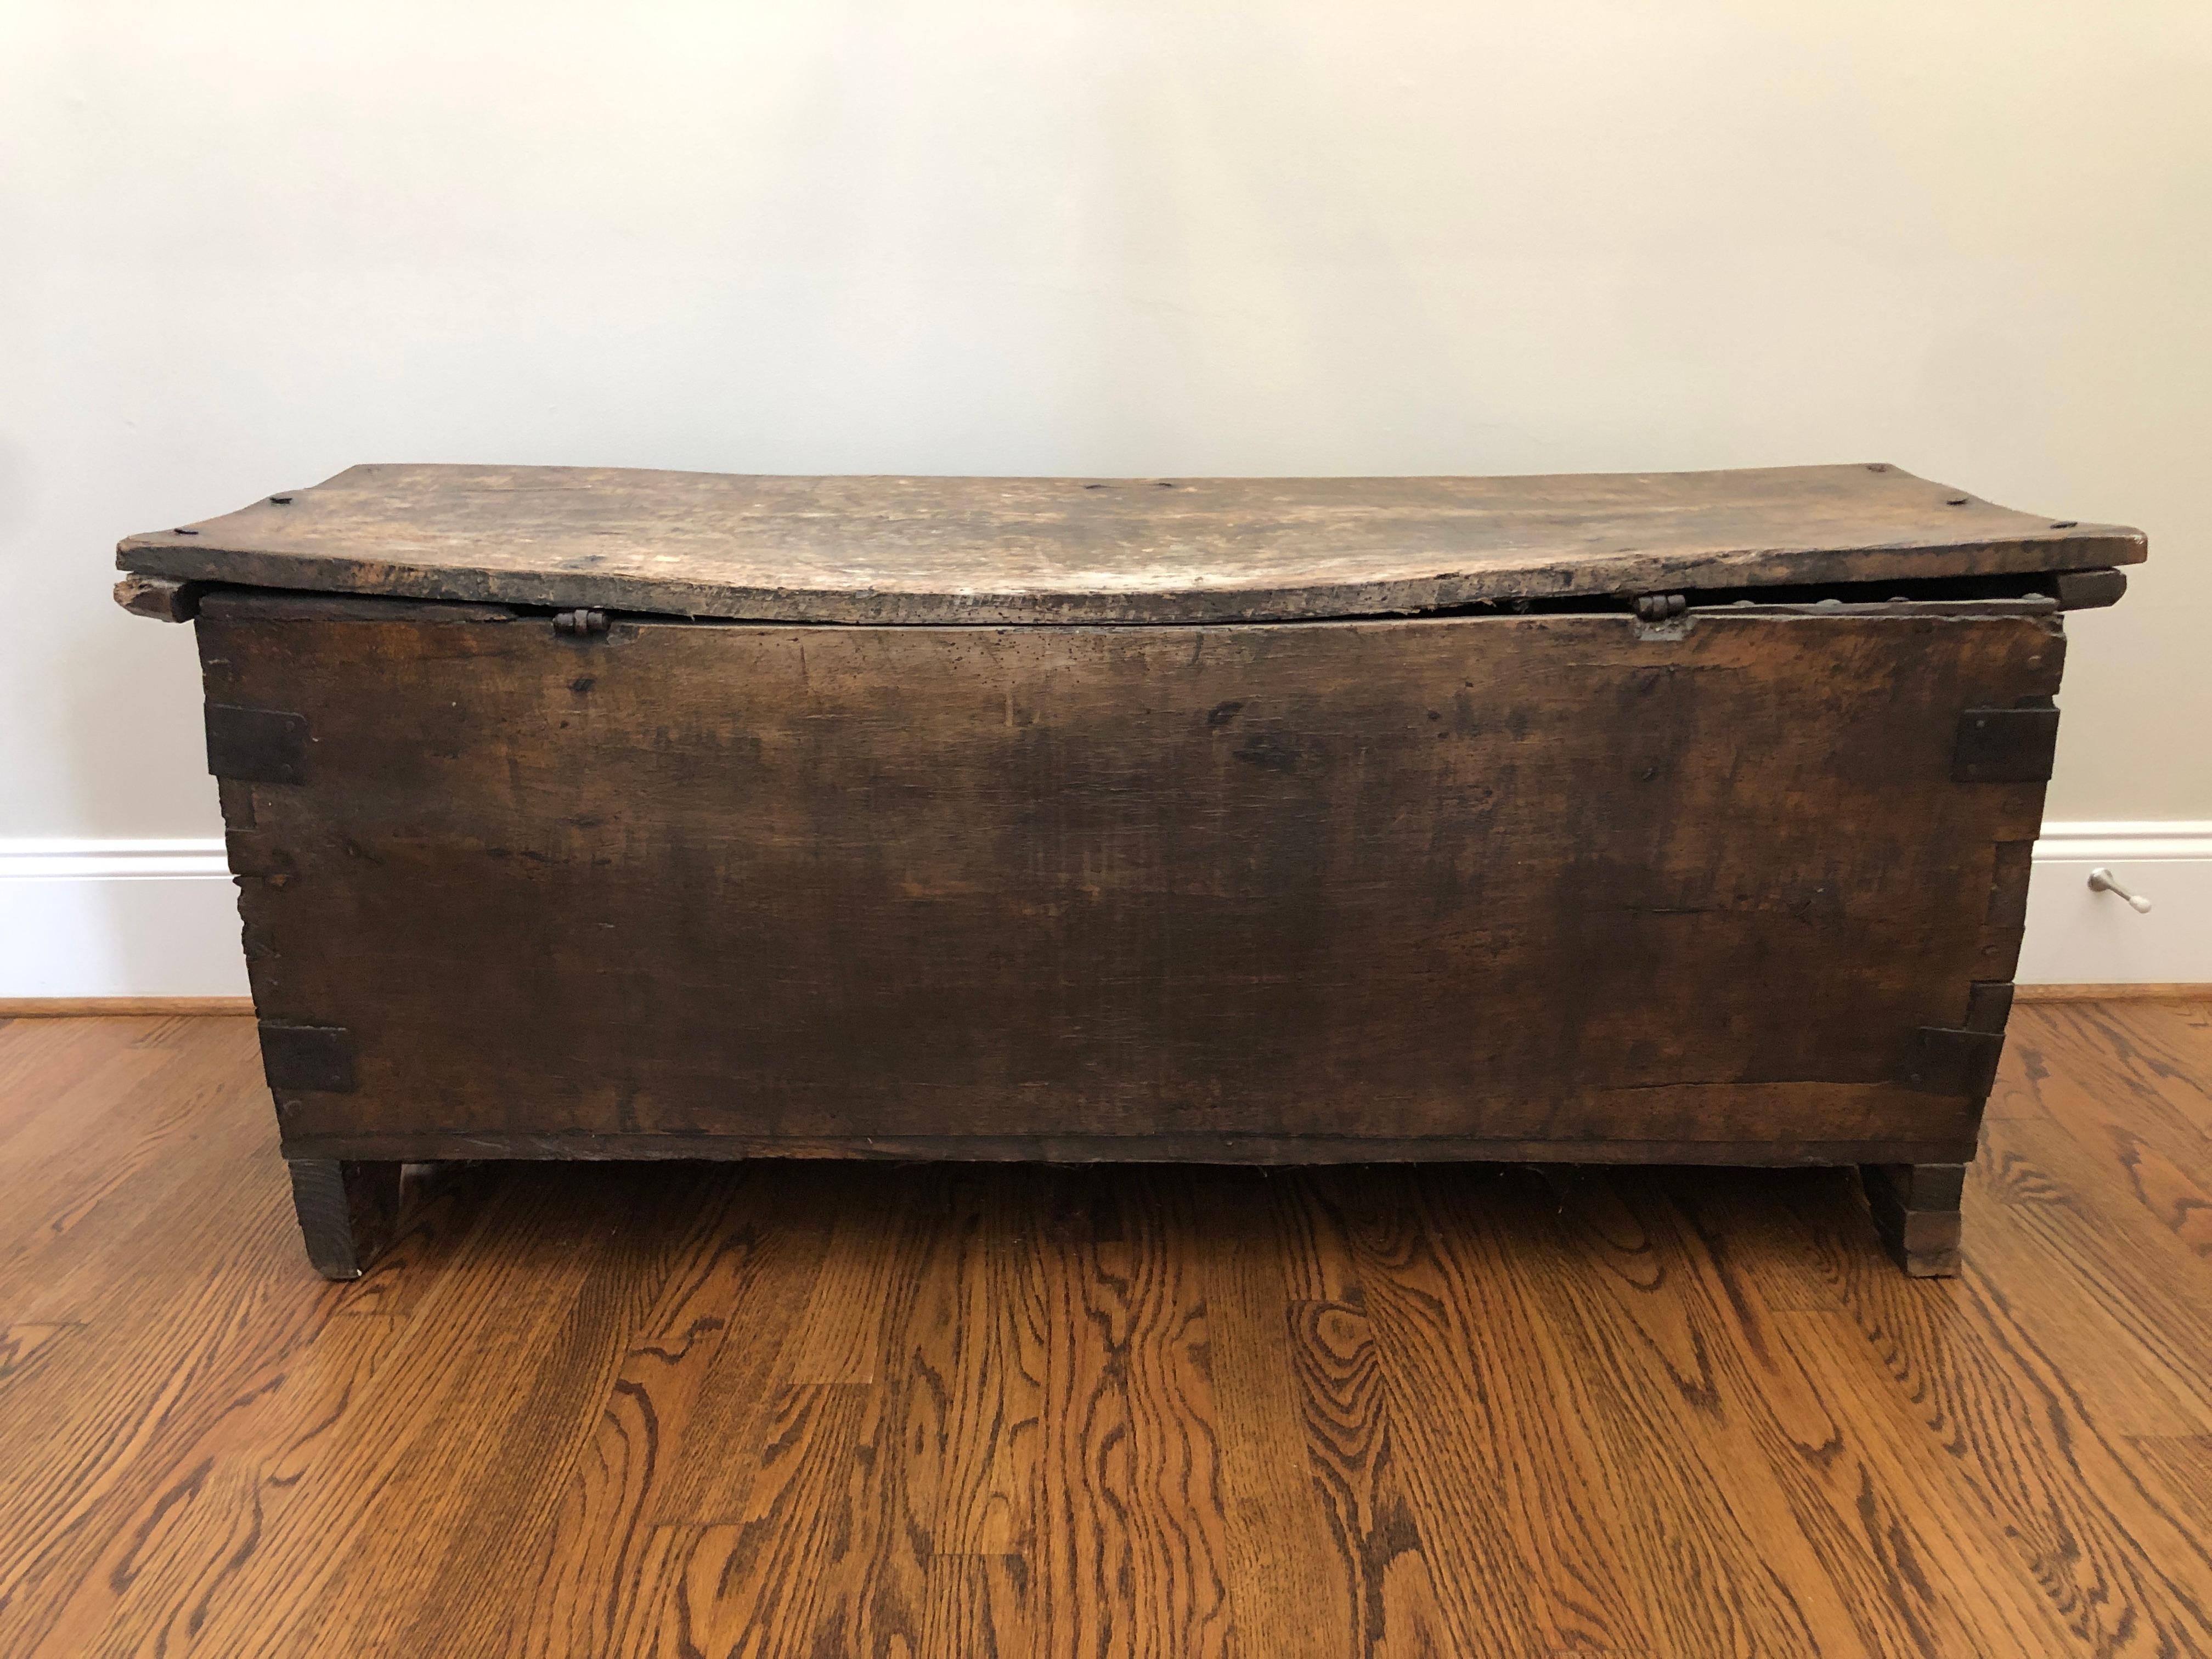 Medieval Antique 16th Century Belgian Coffer - A